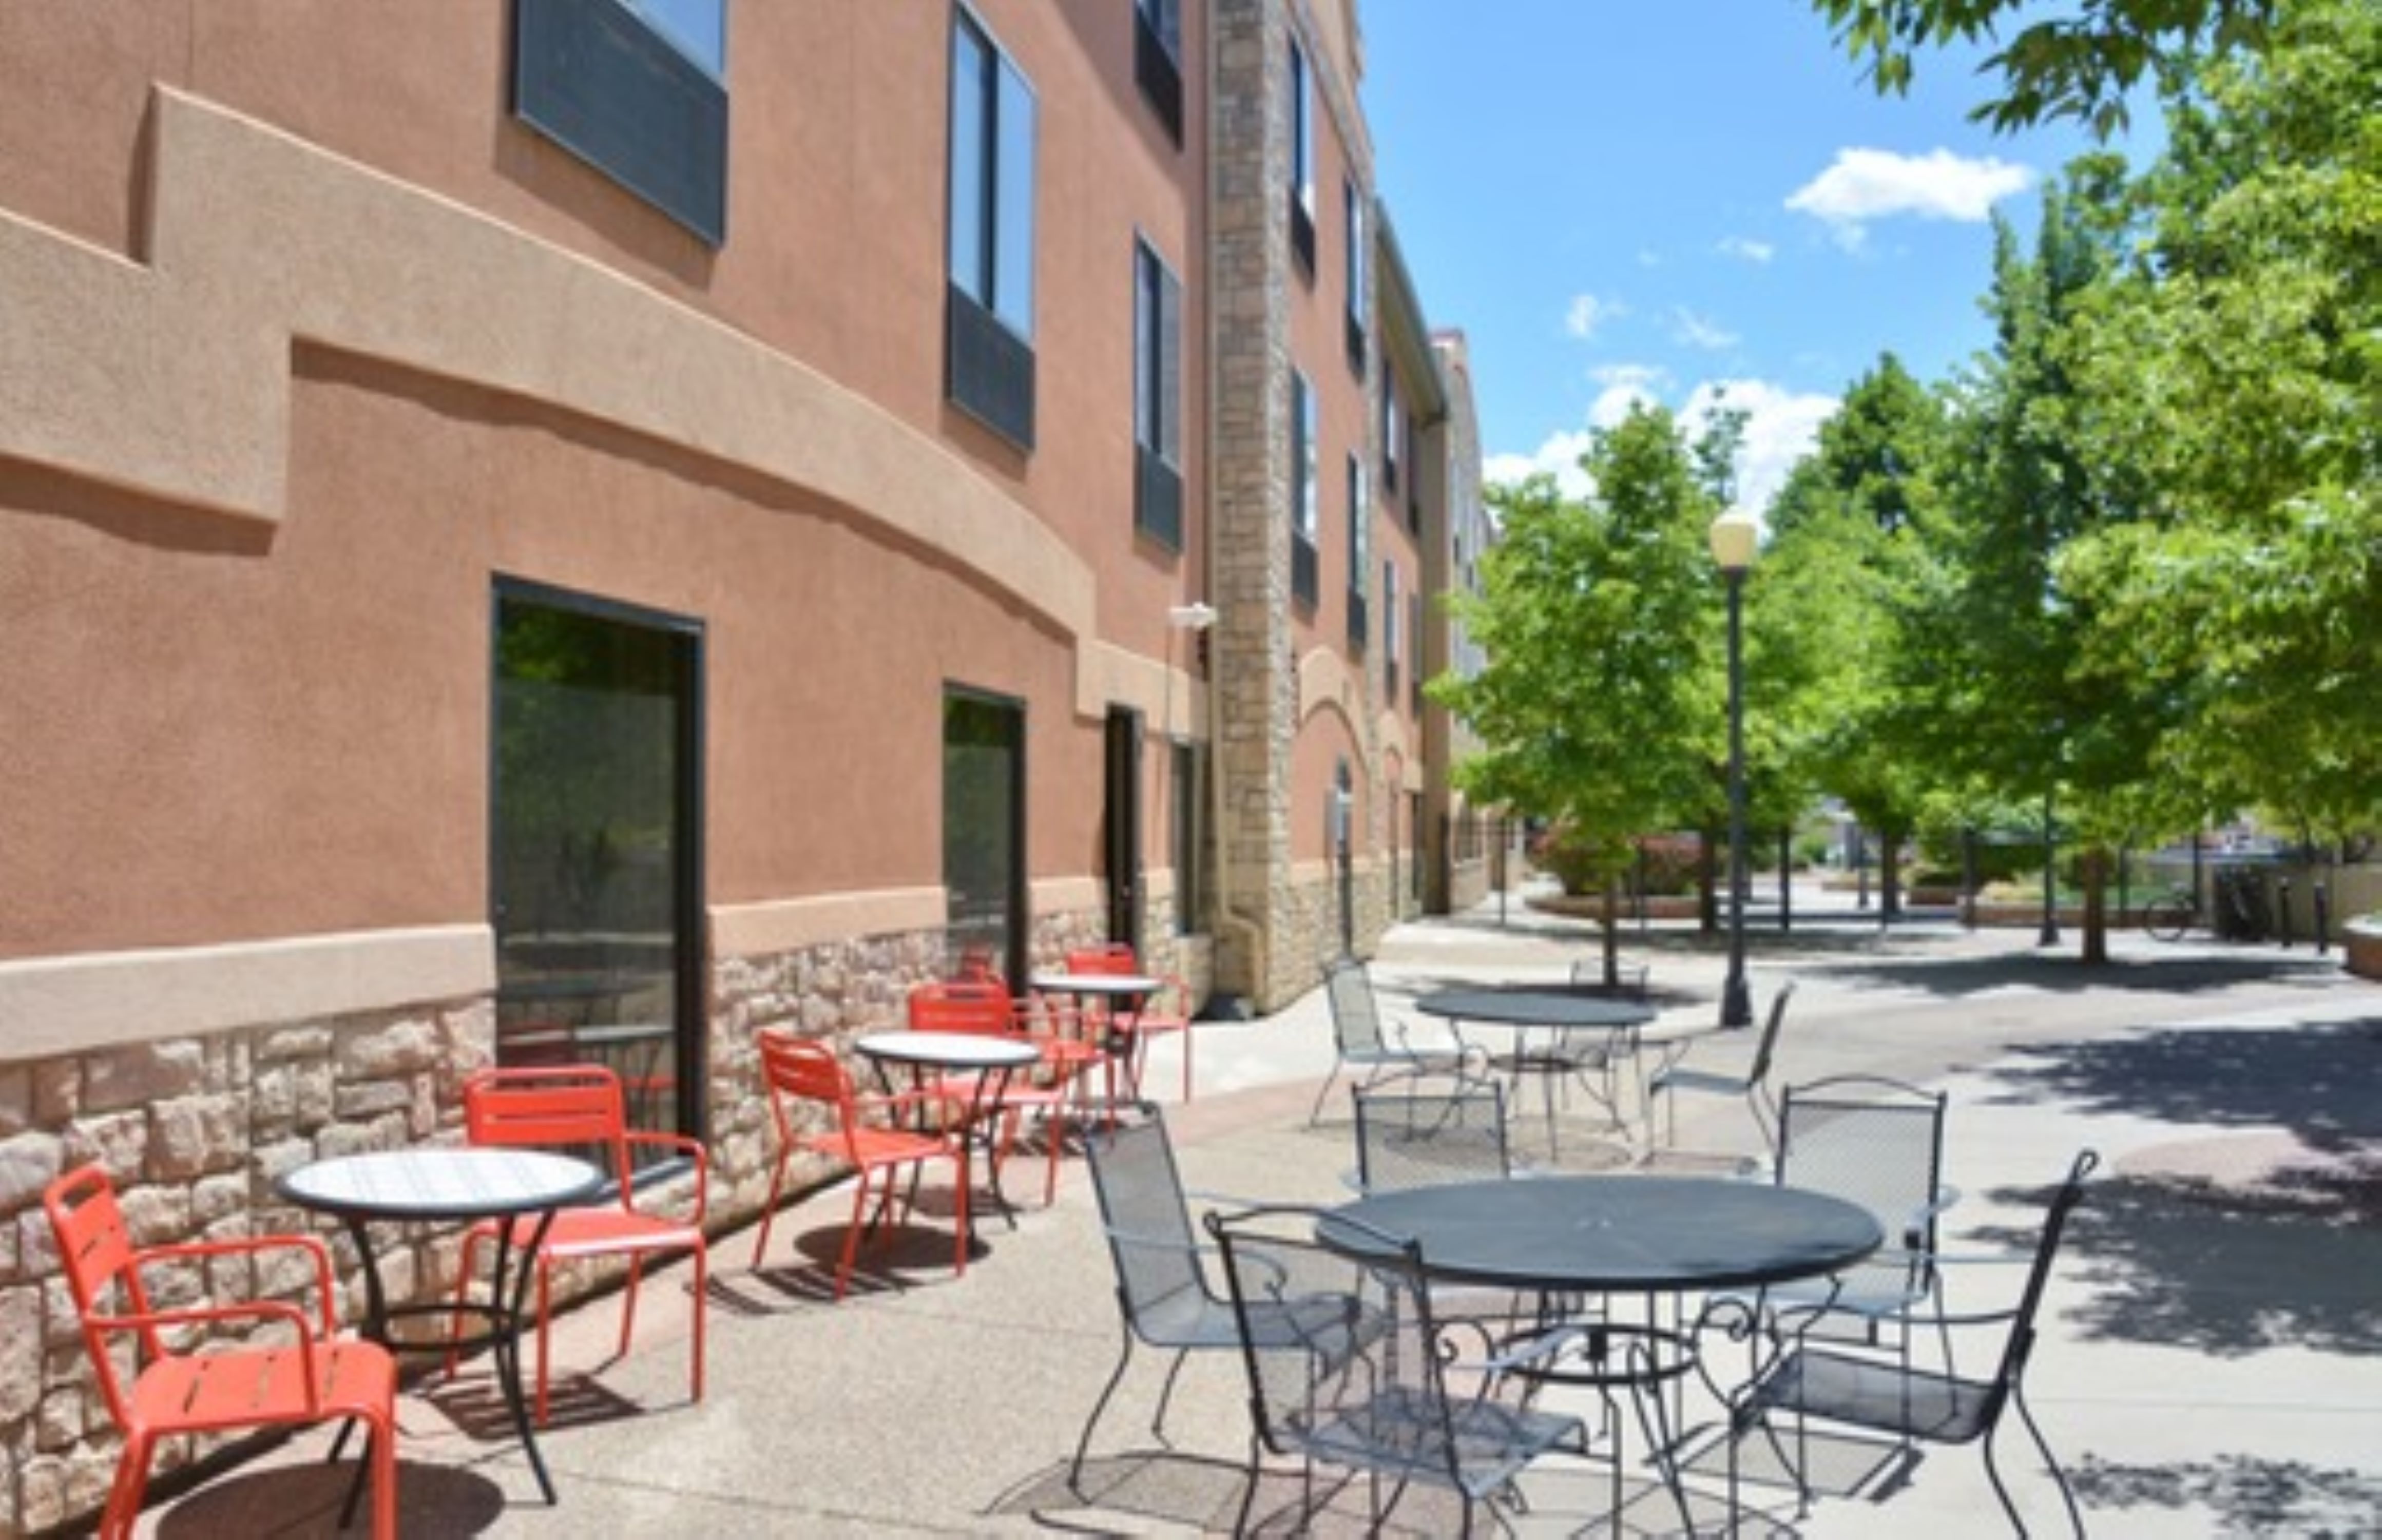 Outdoor Patio Area with seating